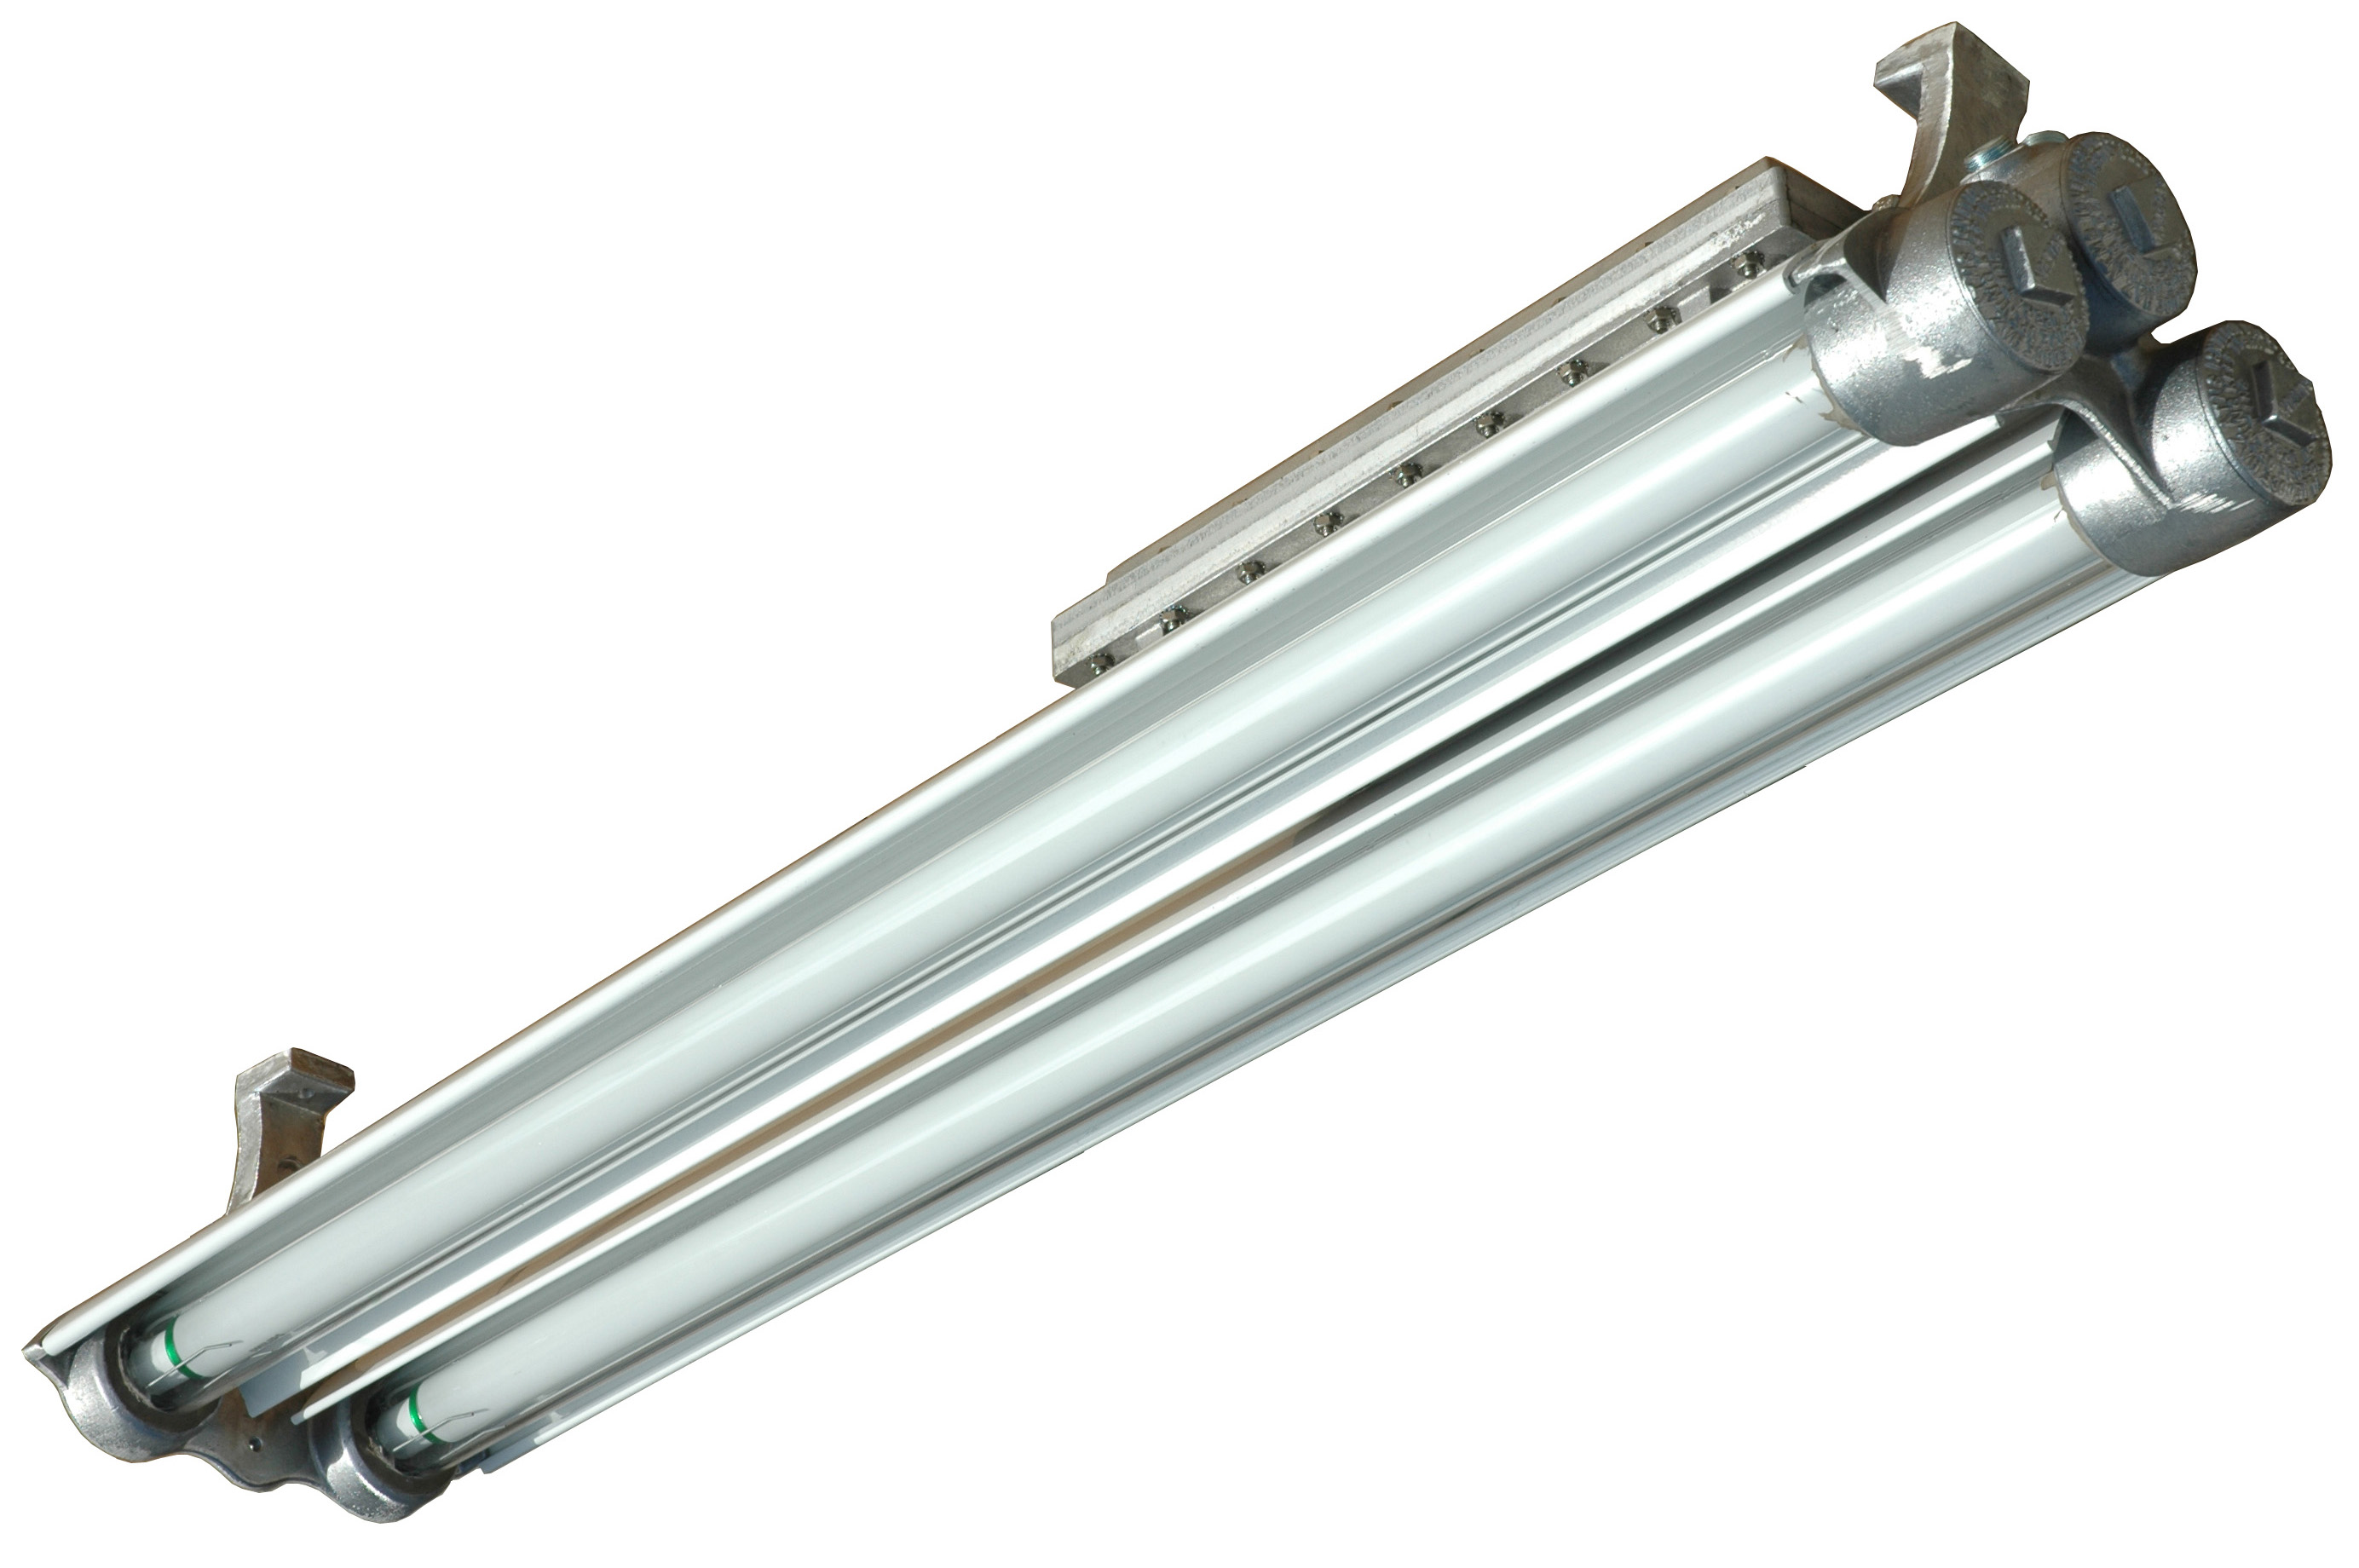 Class 1 Division 1 Fluorescent Light Fixture to be used in New Film